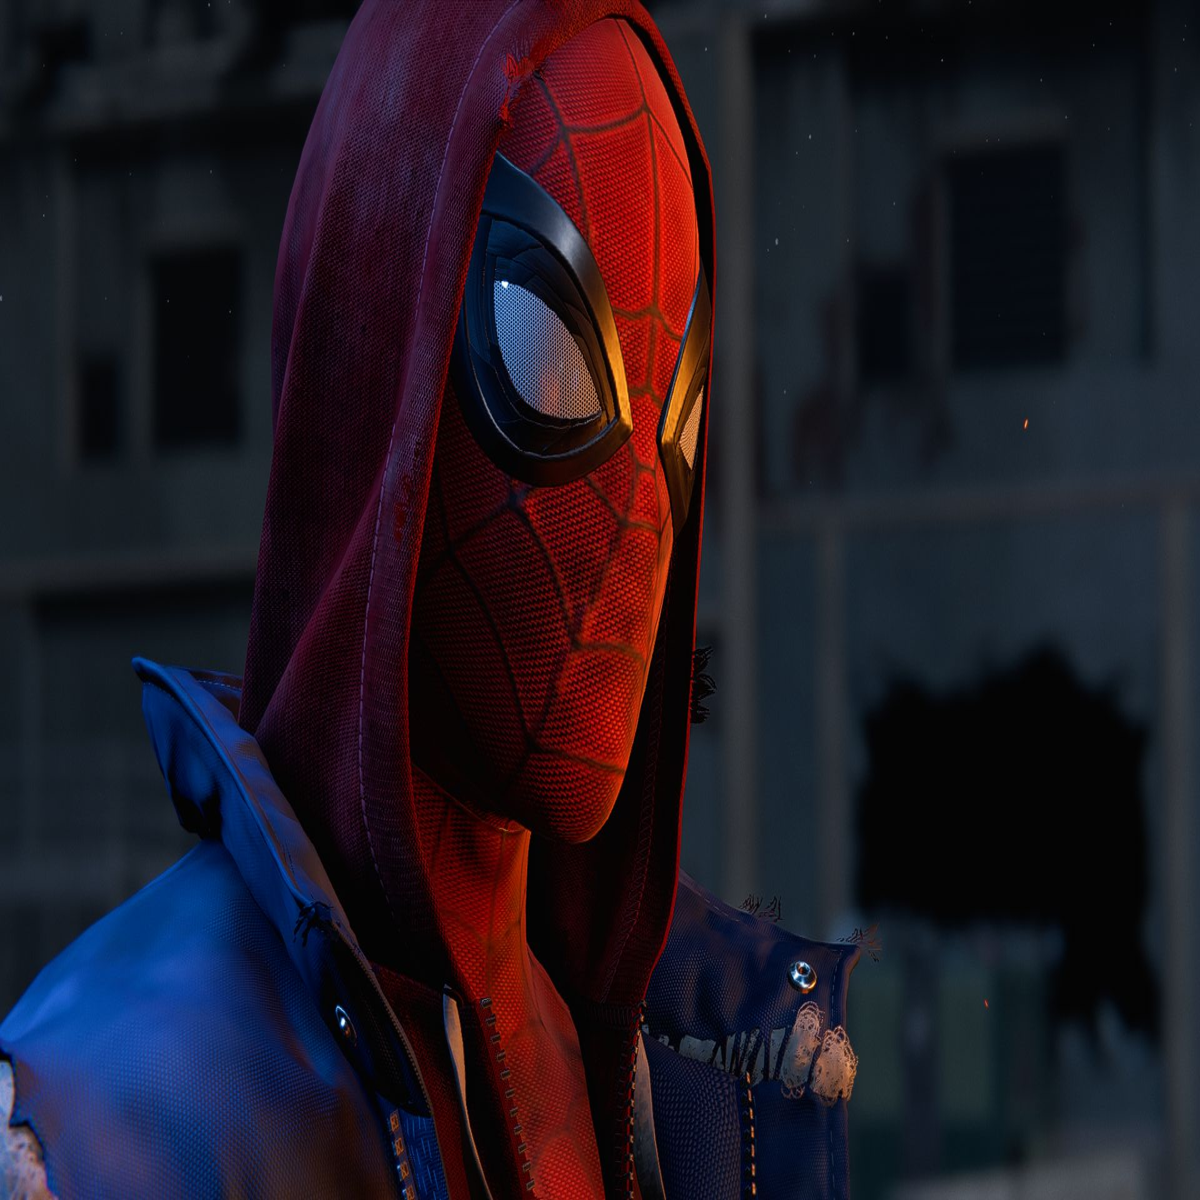 You can now buy Spider-Man Remastered on its own on PS5